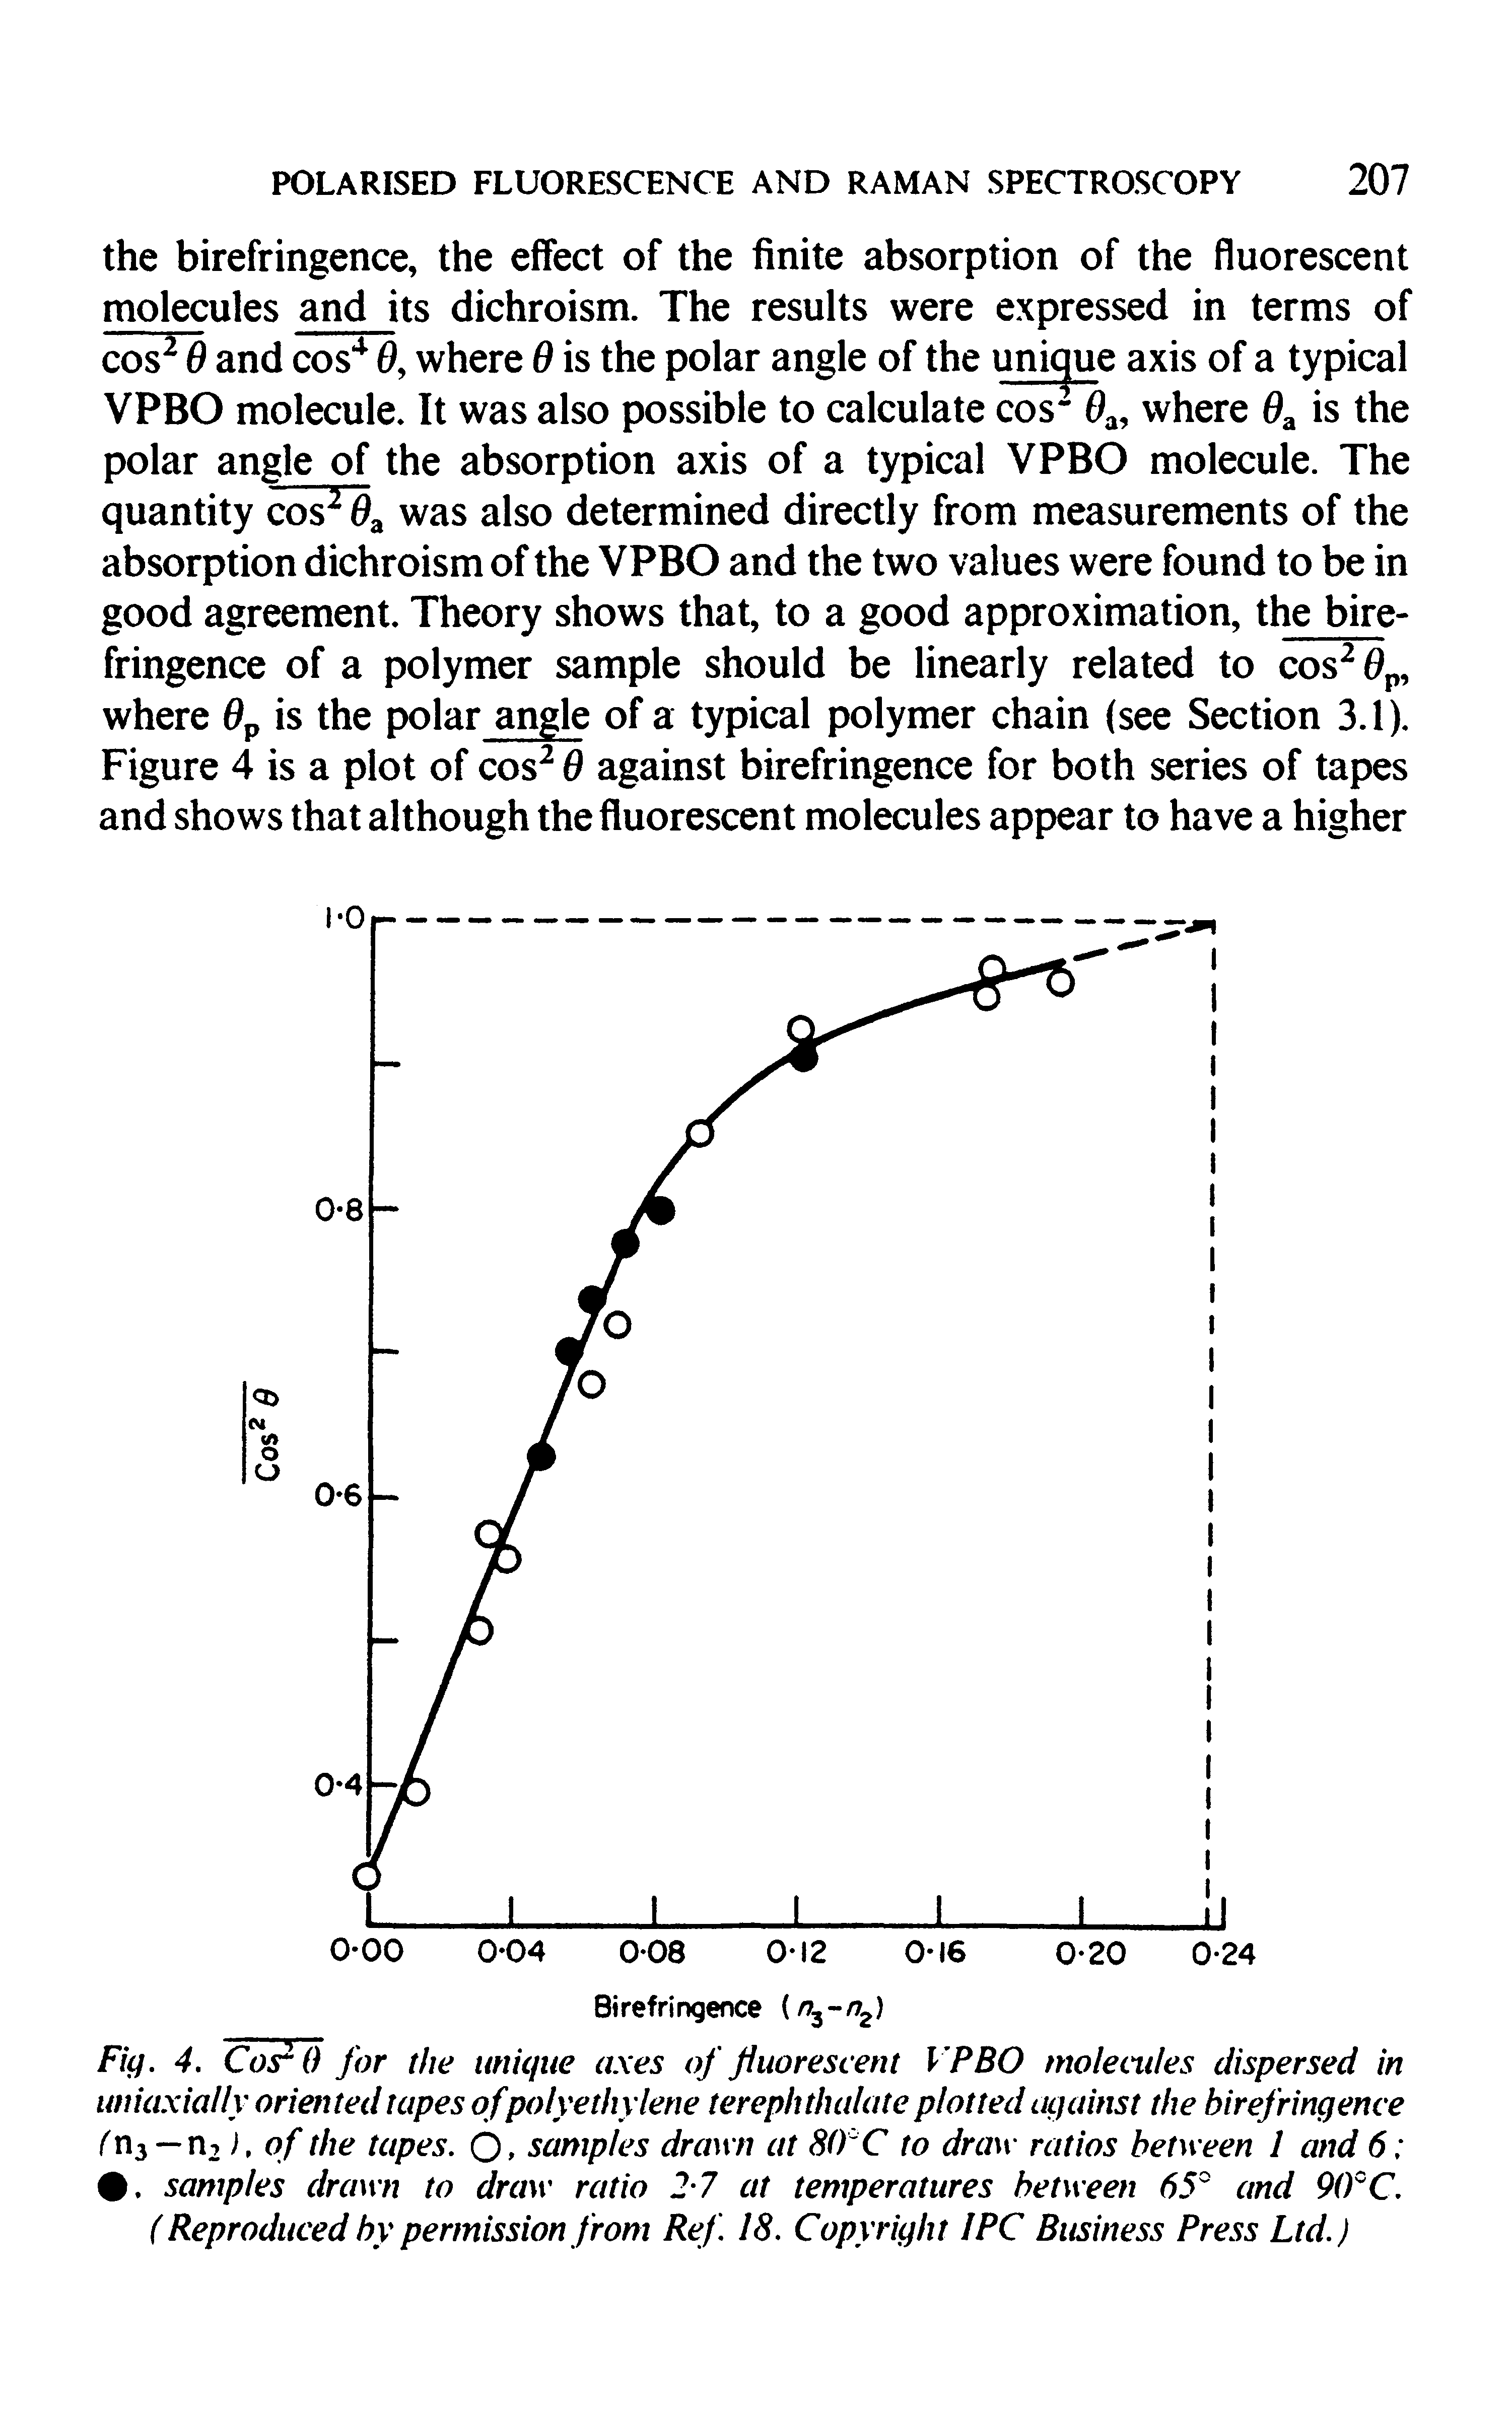 Fig. 4. CorO for the unique axes of fluorescent VPBO molecules dispersed in uniaxially oriented tapes of polyethylene terephthalate plotted against the birefringence — of the tapes. O, samples drawn at S(PC to draw ratios between 1 and 6 . samples drawn to draw ratio 2 7 at temperatures between 65° and 90°C. (Reproduced by permission from Ref. 18. Copyright I PC Business Press Ltd.)...